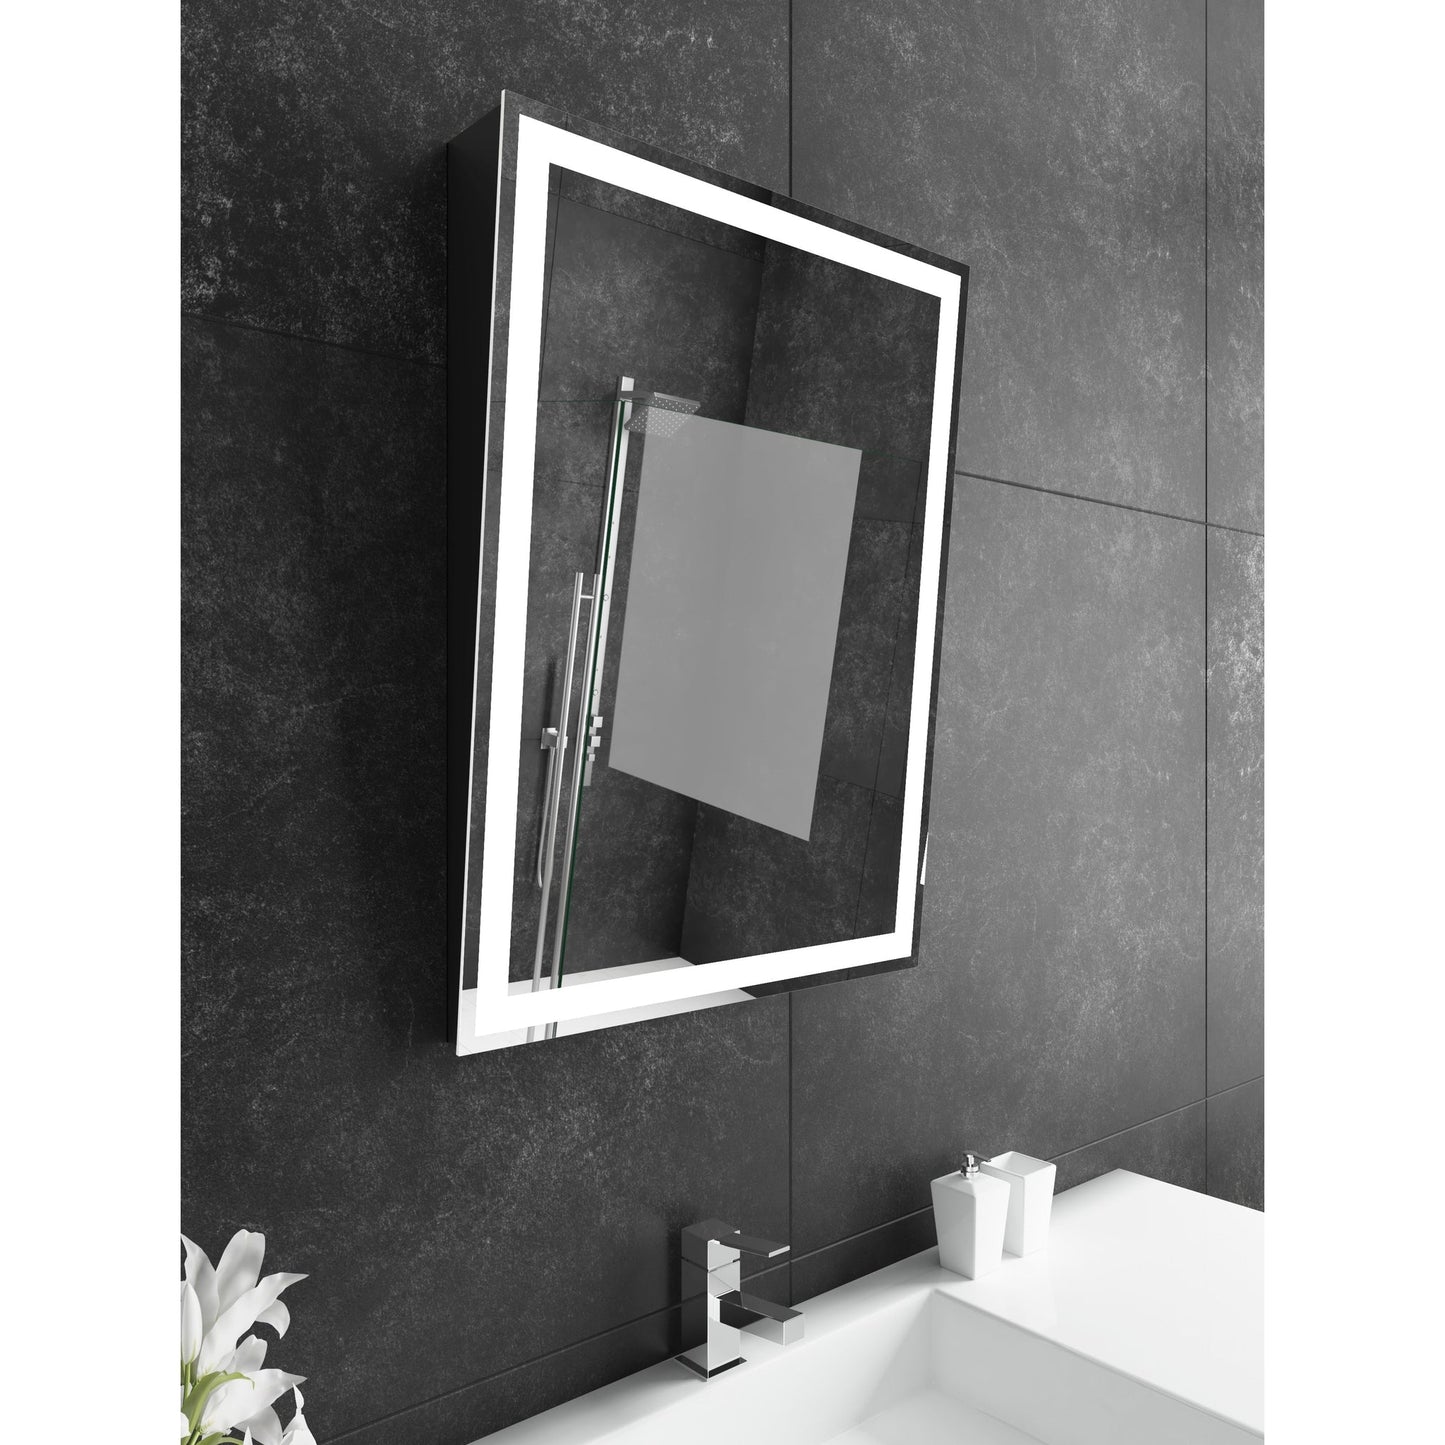 Paris Mirror Adira 24" x 32" Black Front-Lit Lighted Super Bright Dimmable Wall-Mounted 3000K LED Mirror With Tilted Top Frame